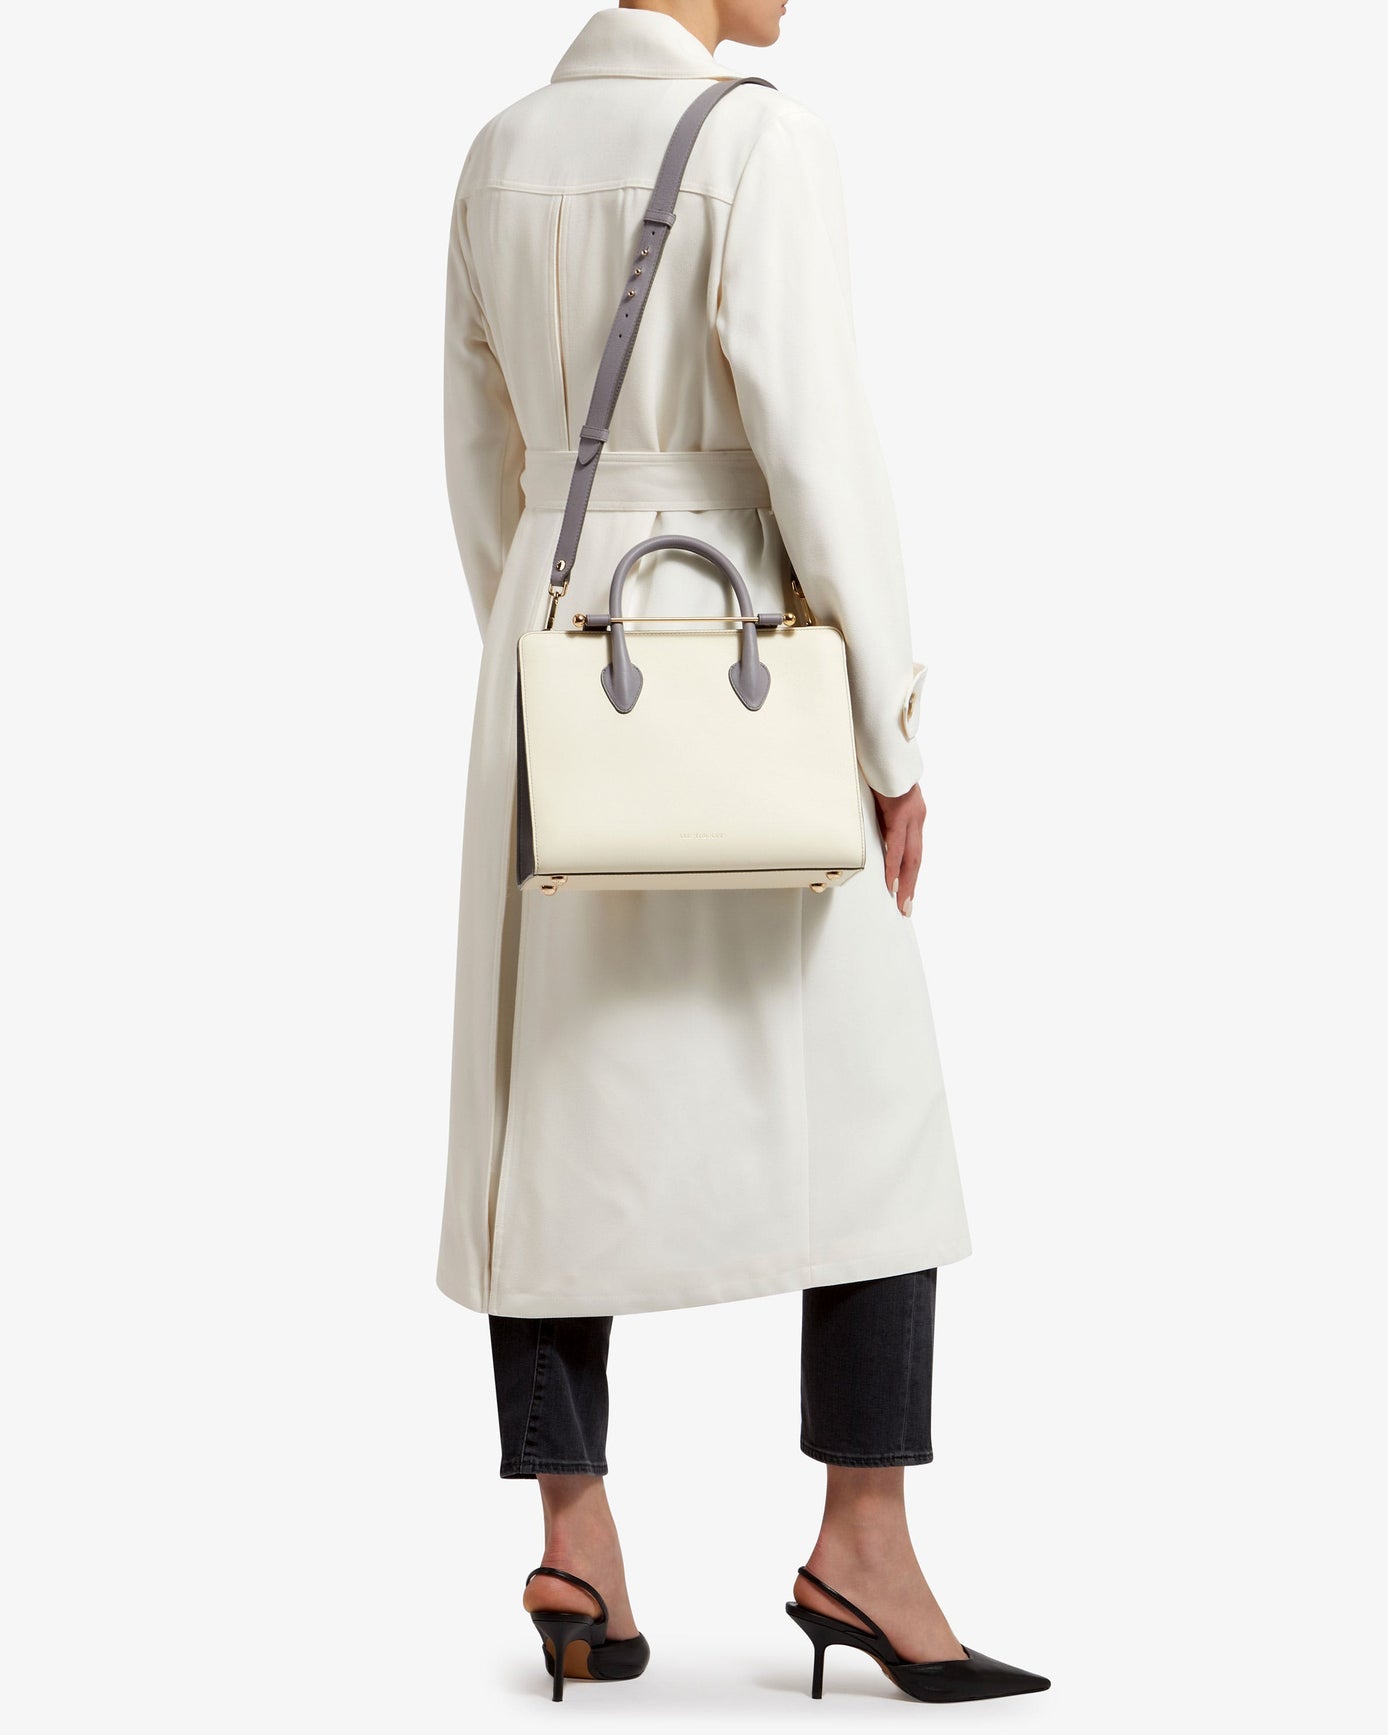 The Strathberry Midi Tote - Top Handle Leather Tote Bag - White ...